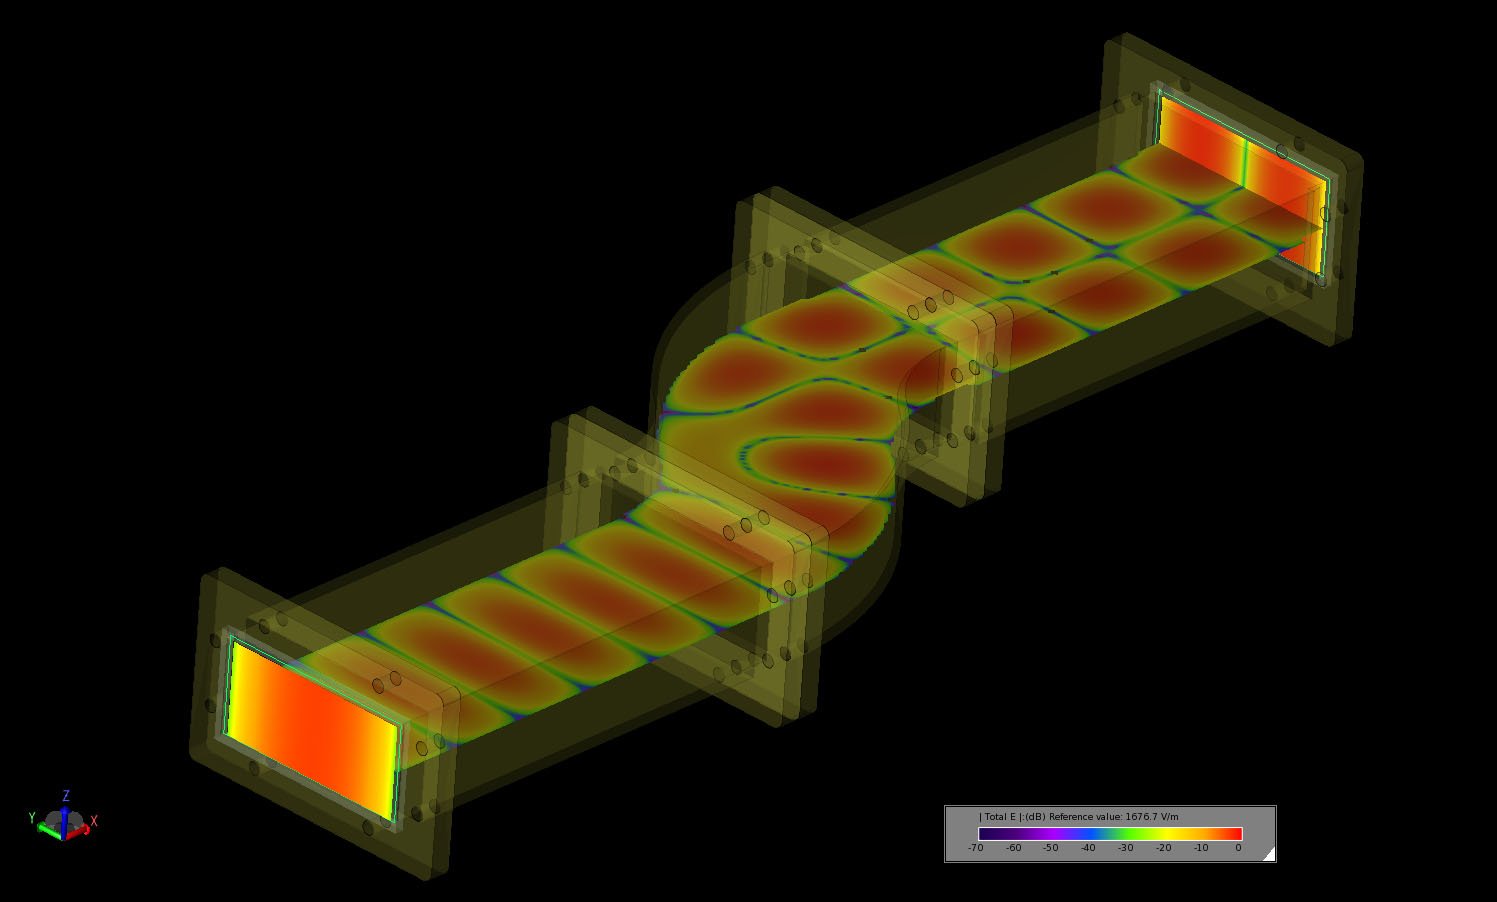 Figure 4The steady-state electric field distribution in the dual bend converter at 8.5 GHz with the field distribution at each of the ports displayed.